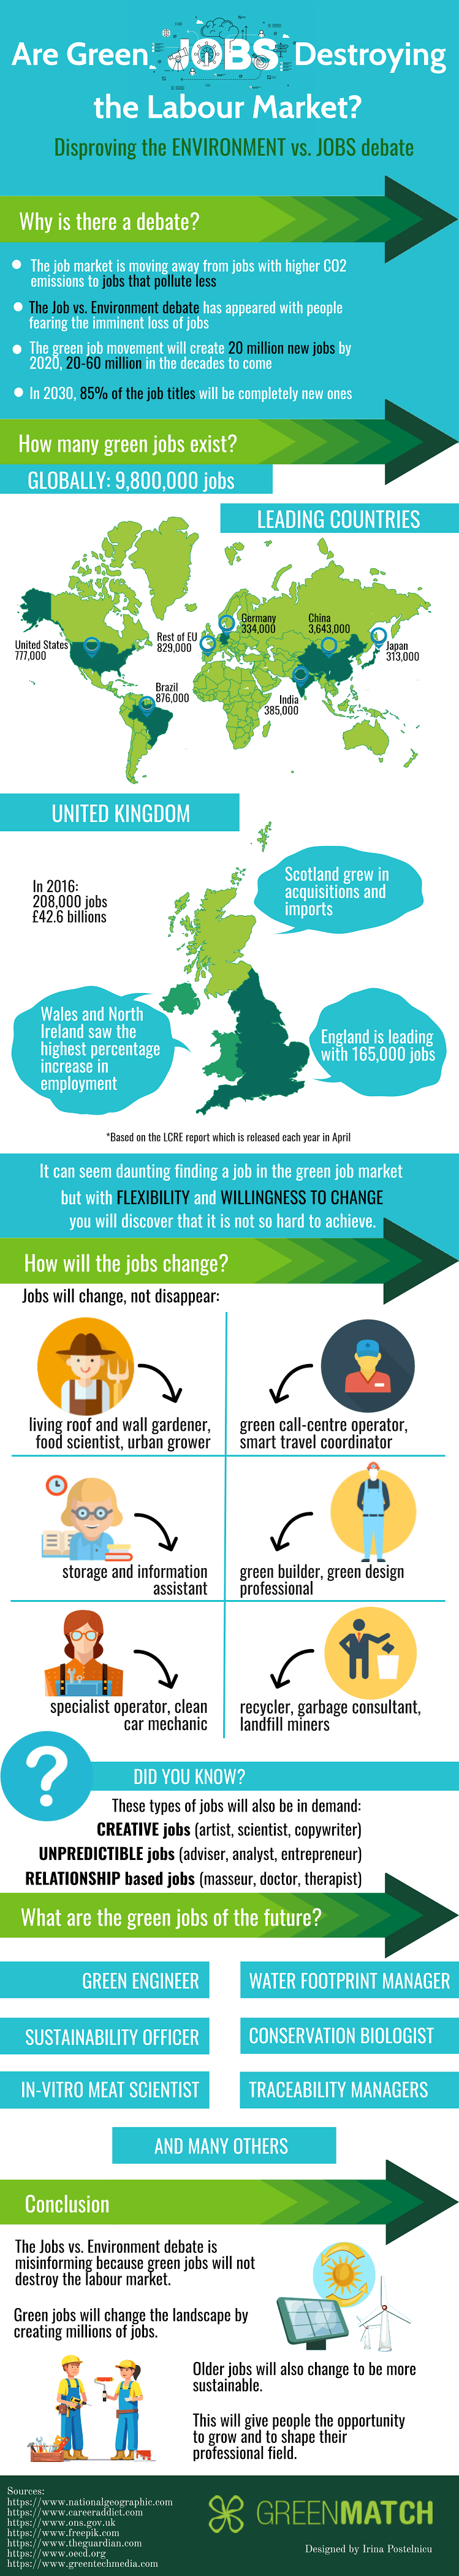 Infographic-Do green jobs affect the labour market?